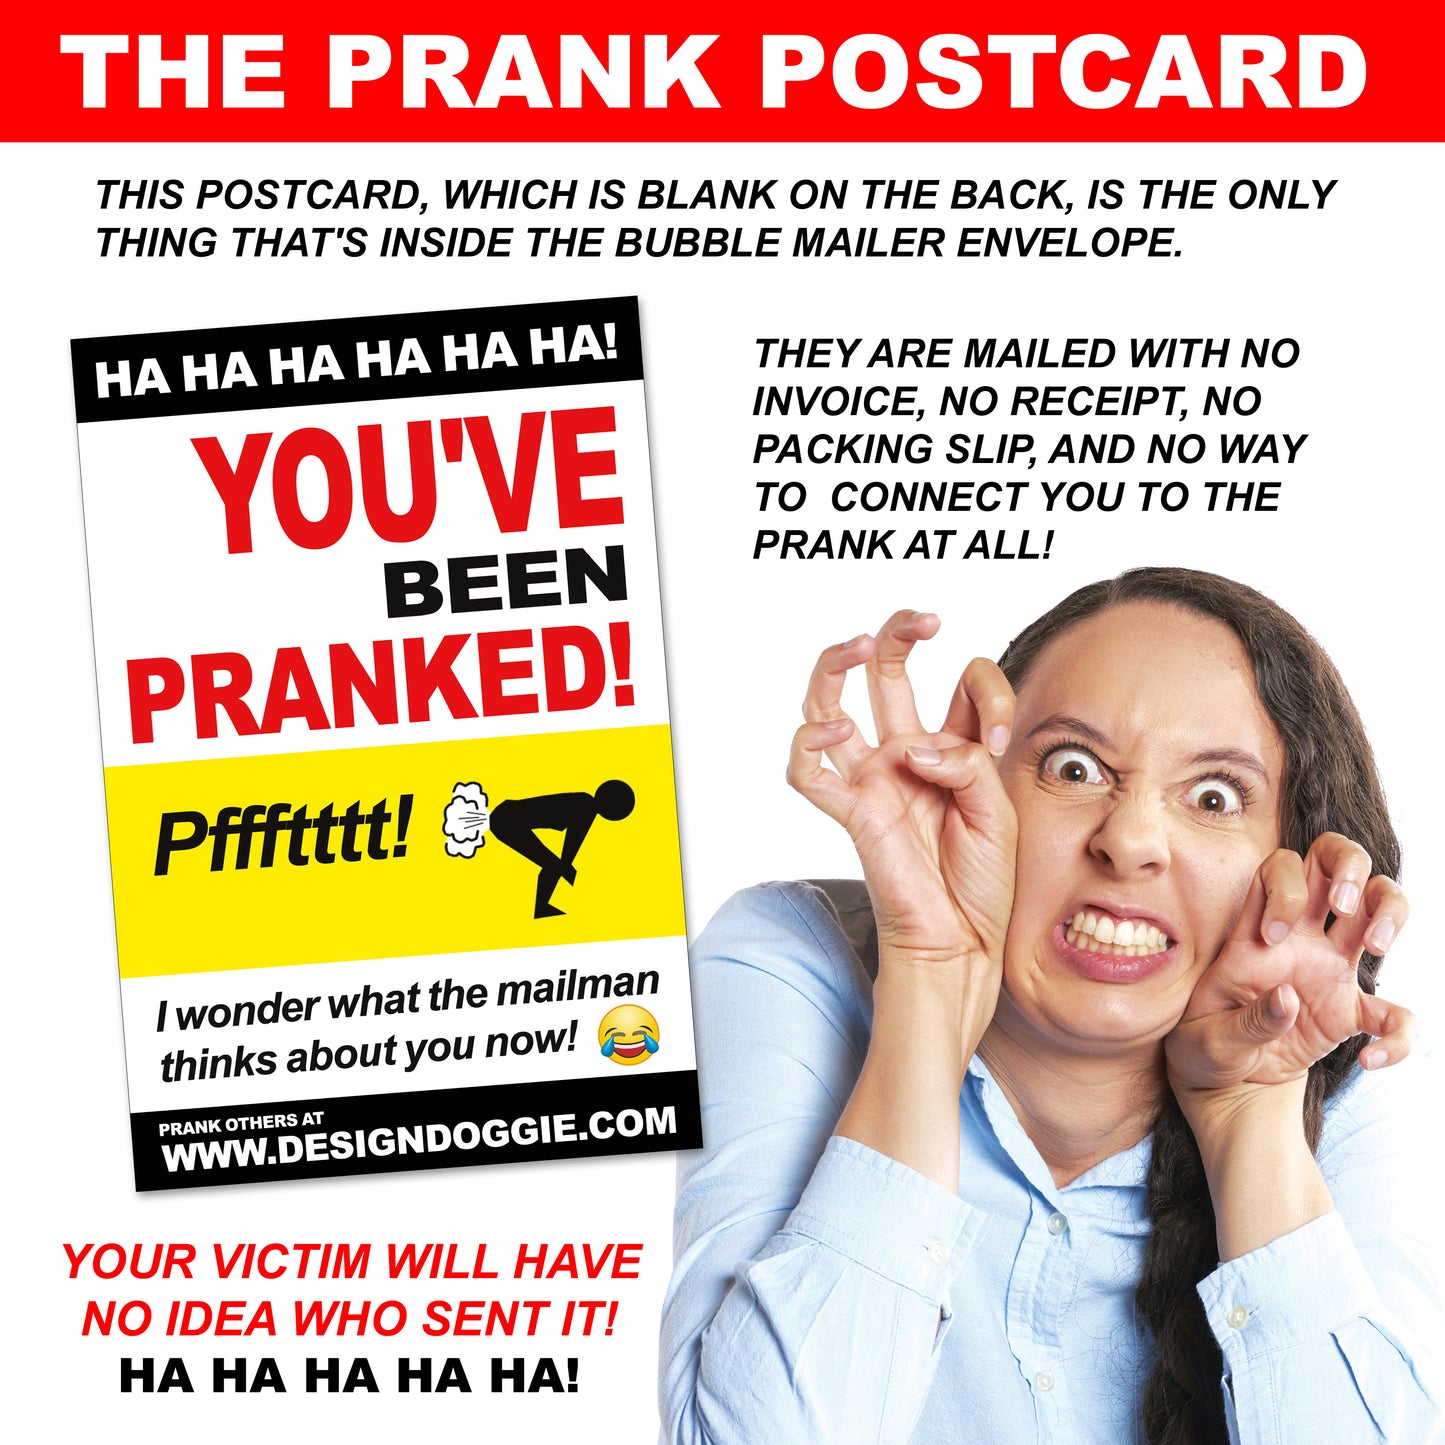 Dildo Express Package Left at Neighbors embarrassing prank envelope gets mailed directly to your victims 100% anonymously!